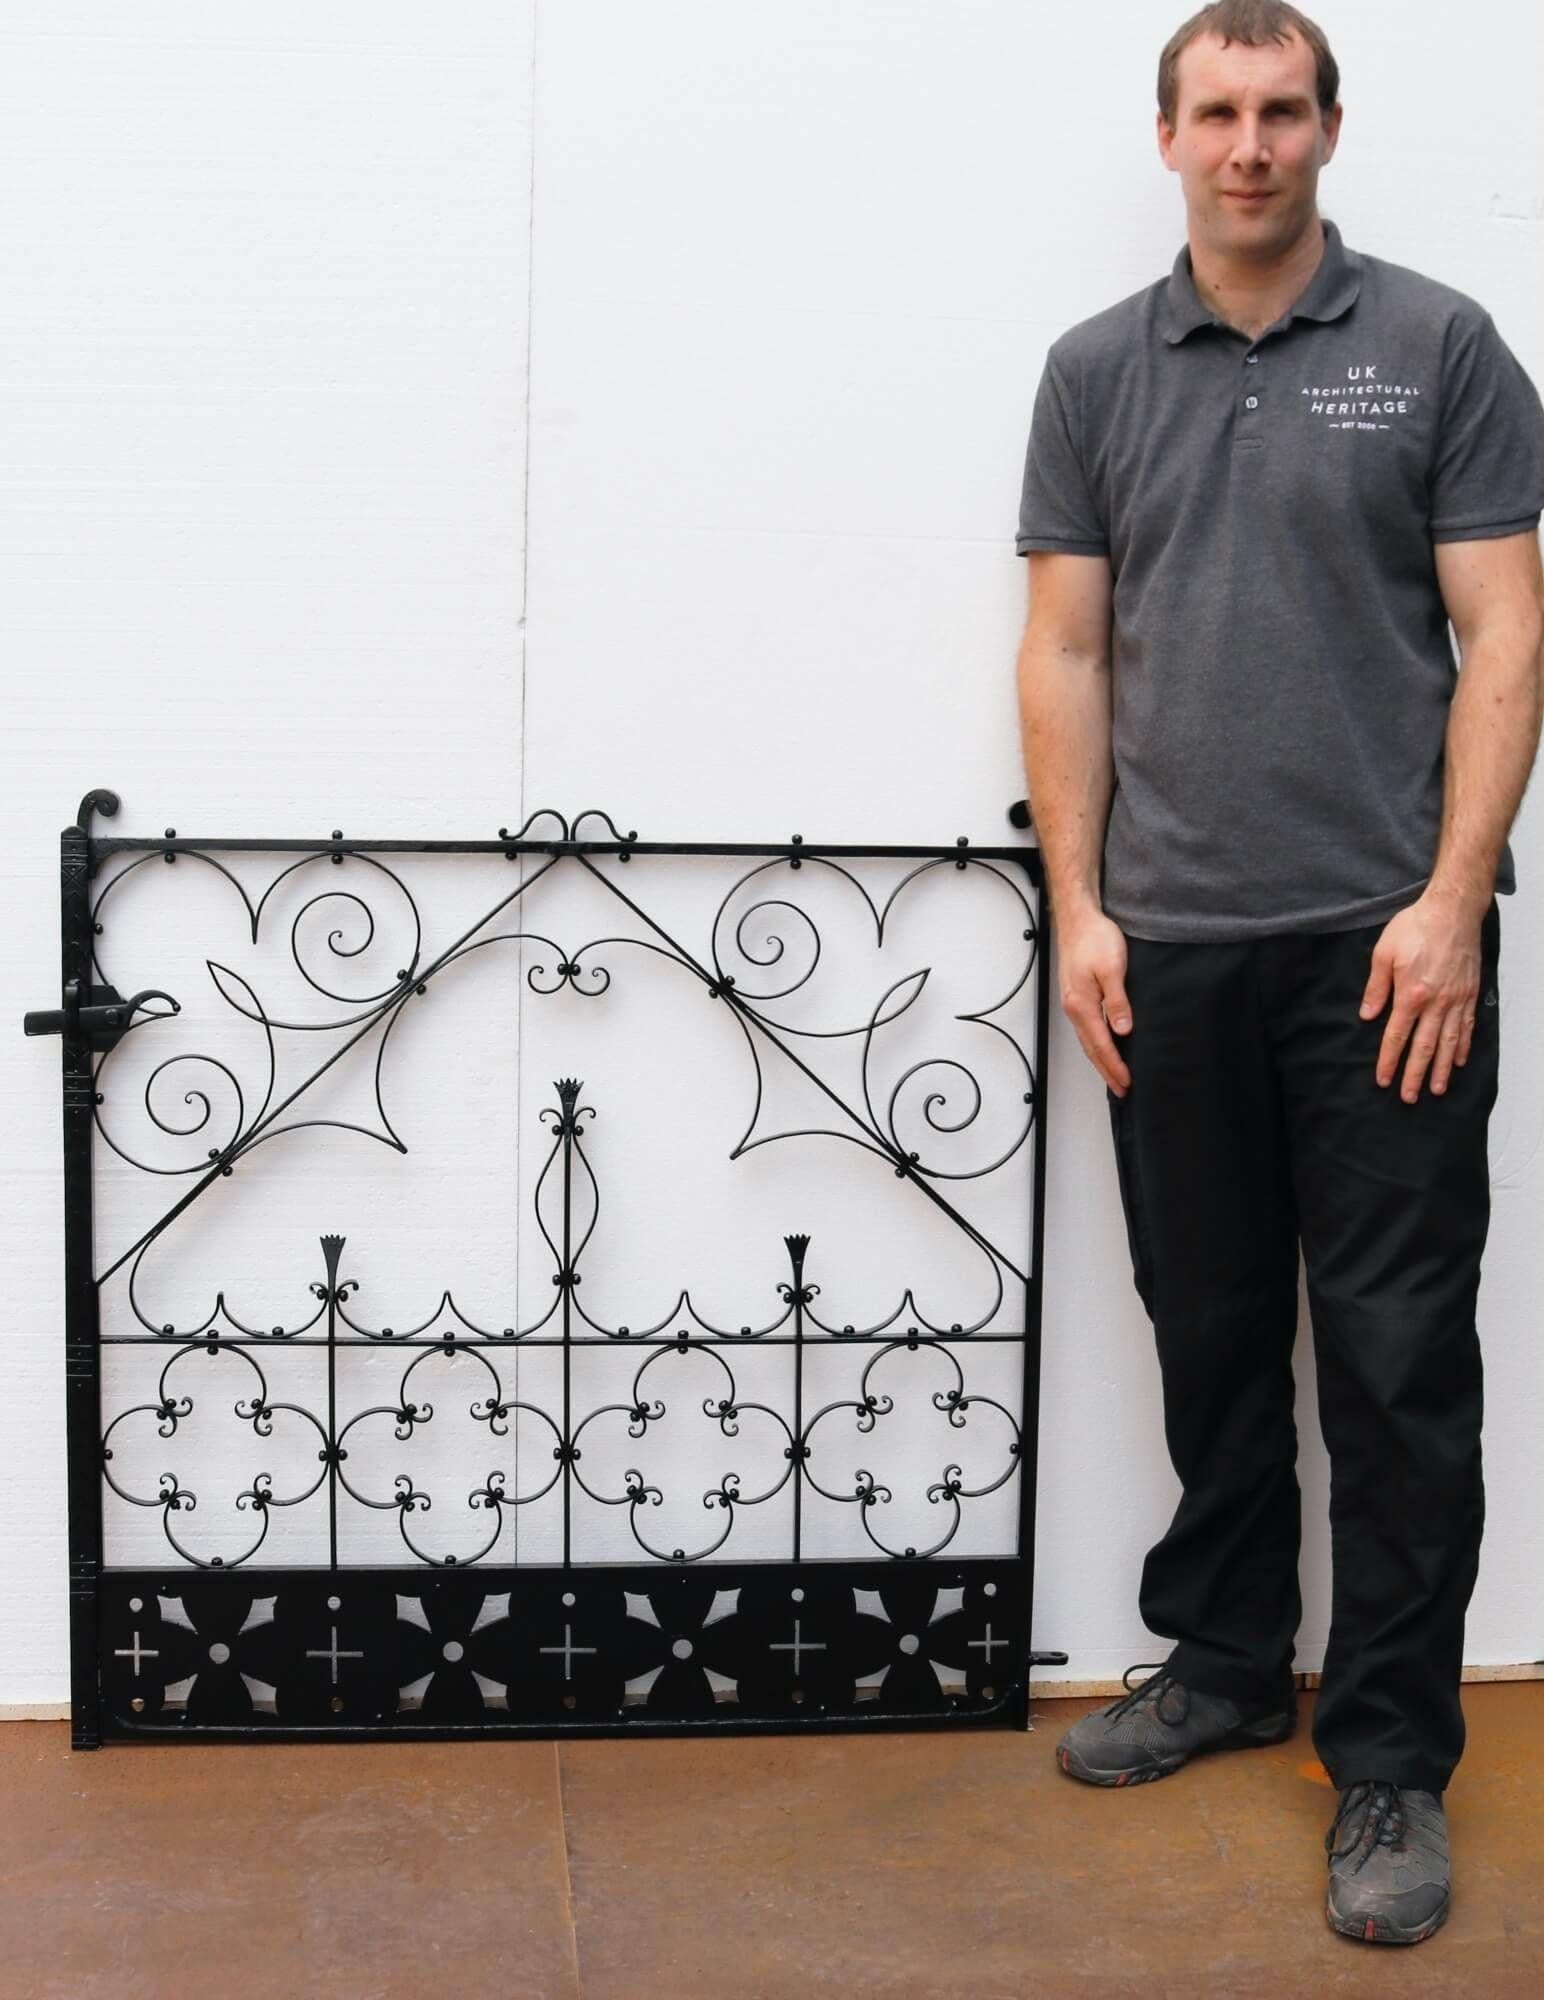 With its elegant, handcrafted scrollwork and ornate details, this antique wrought iron gate is a beautiful addition a traditional garden. It has stood the test of time for more than 130 years, made by a talented 19th century blacksmith. It has a